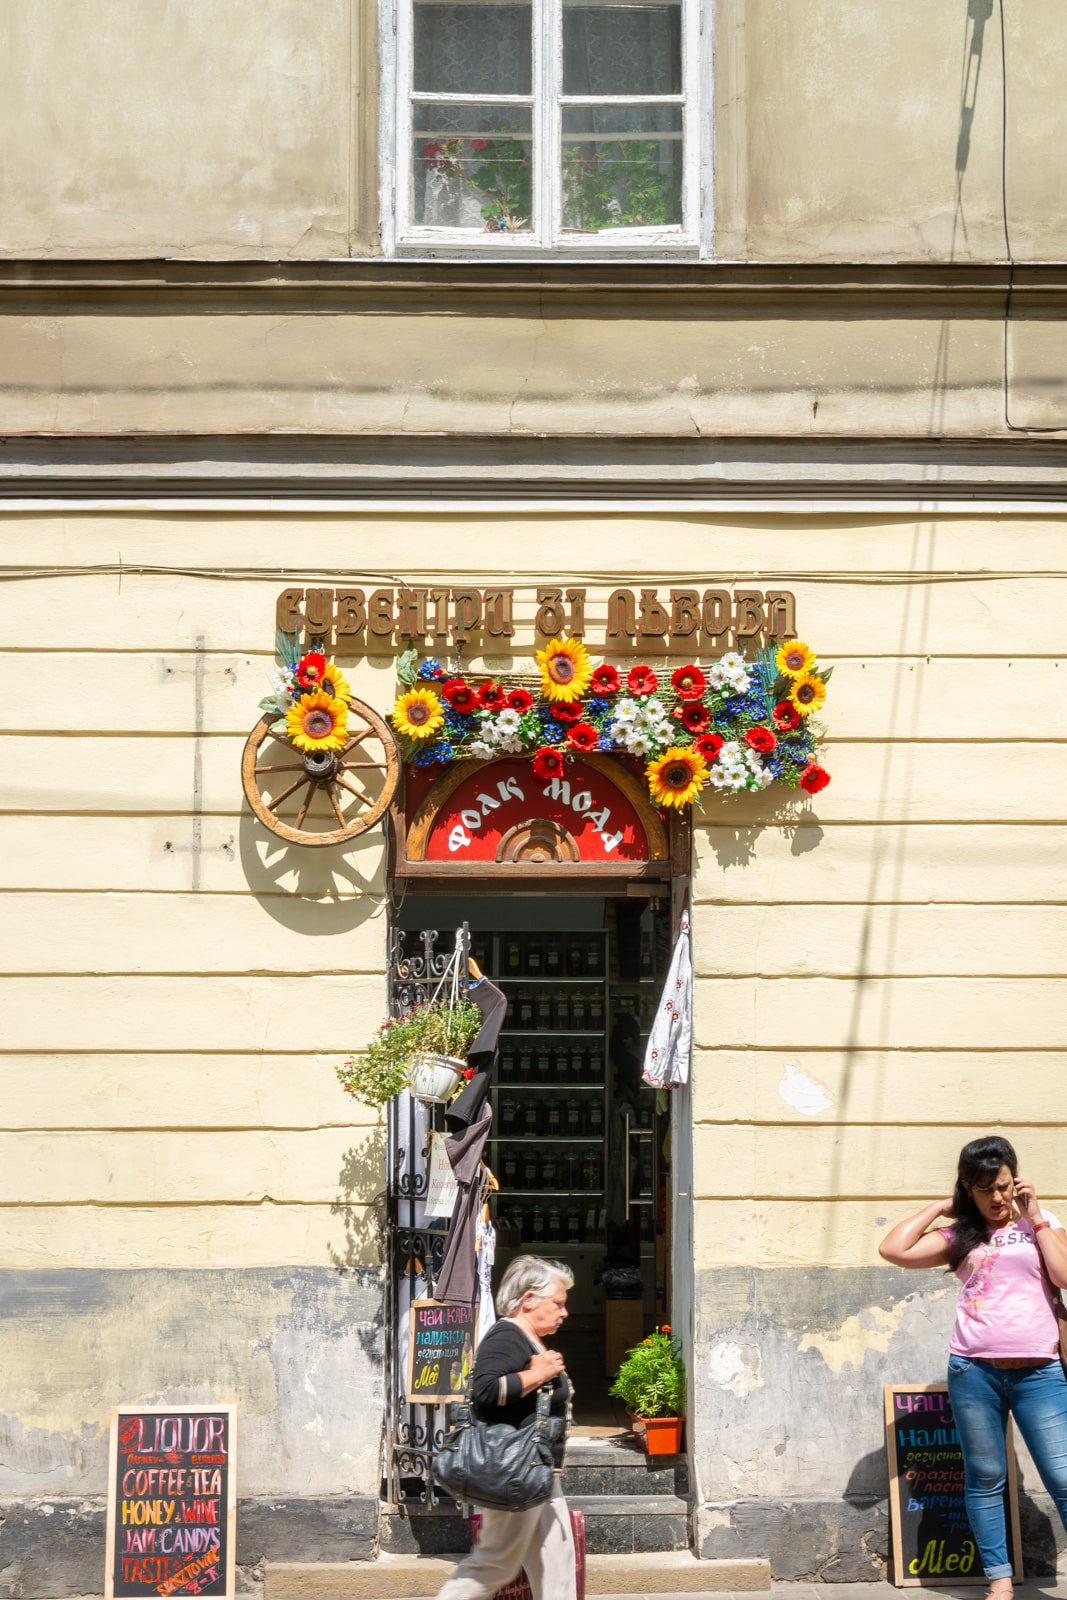 A store front with Cyrillic writing in Lviv, Ukraine